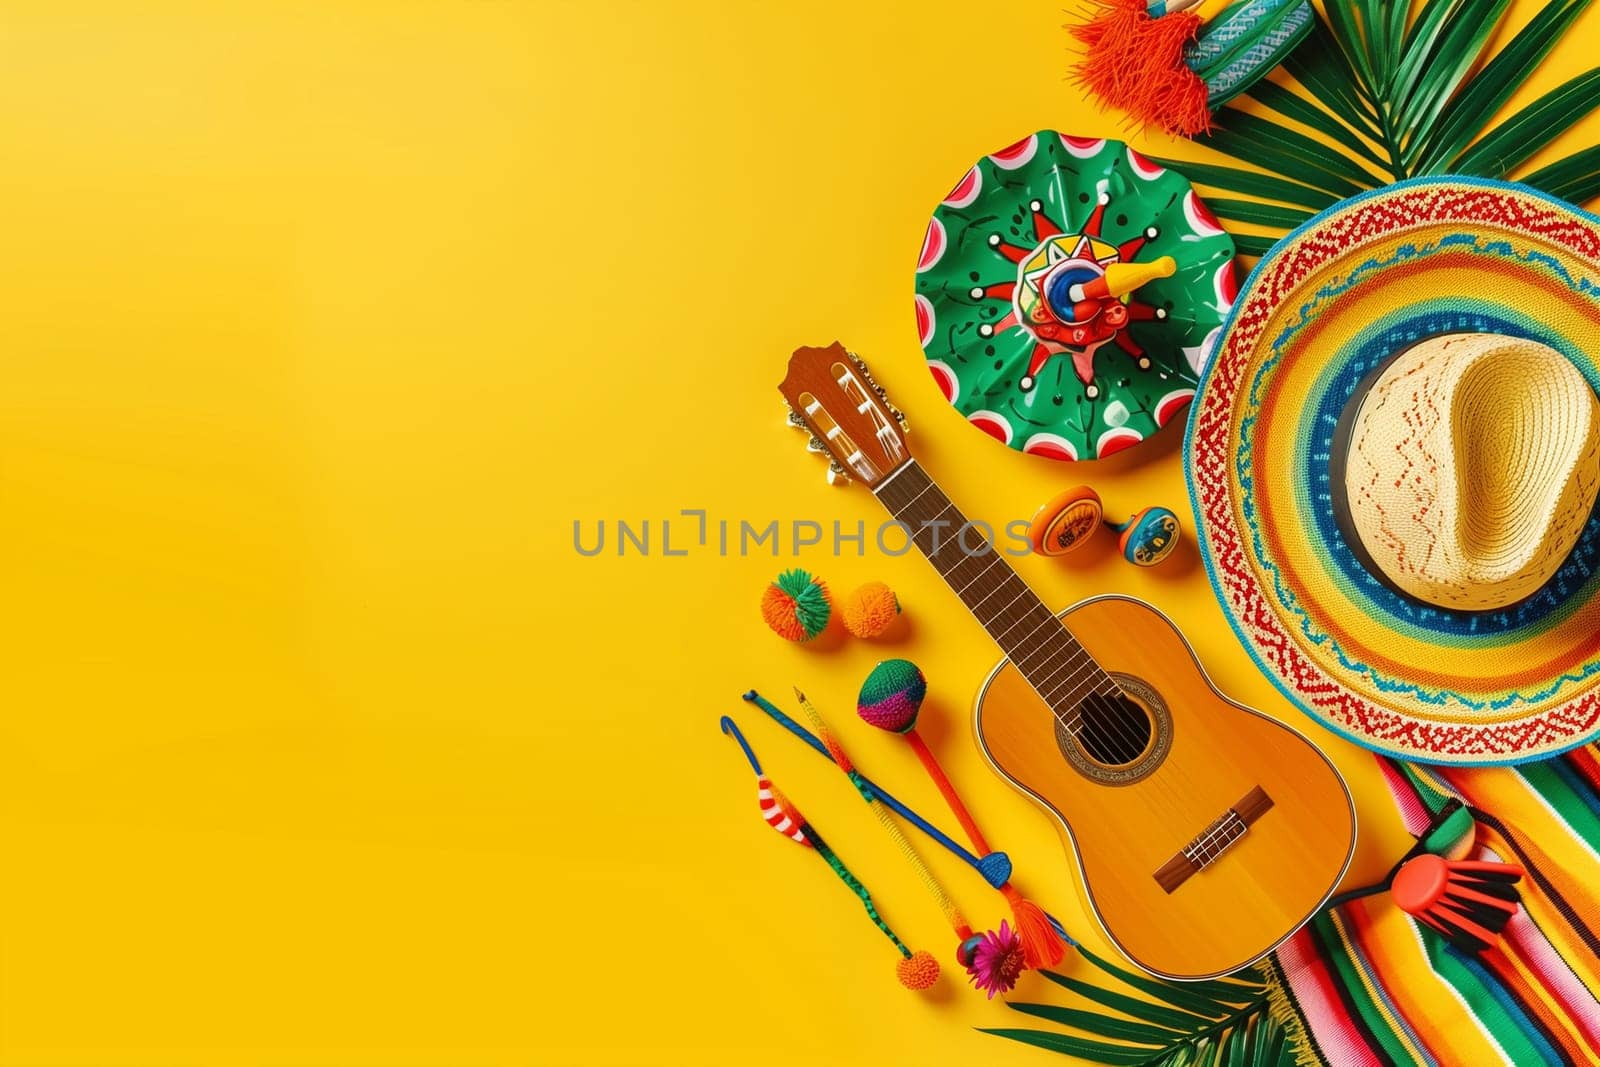 A guitar, Mexican sombrero, and assorted items are arranged on a vibrant yellow background.